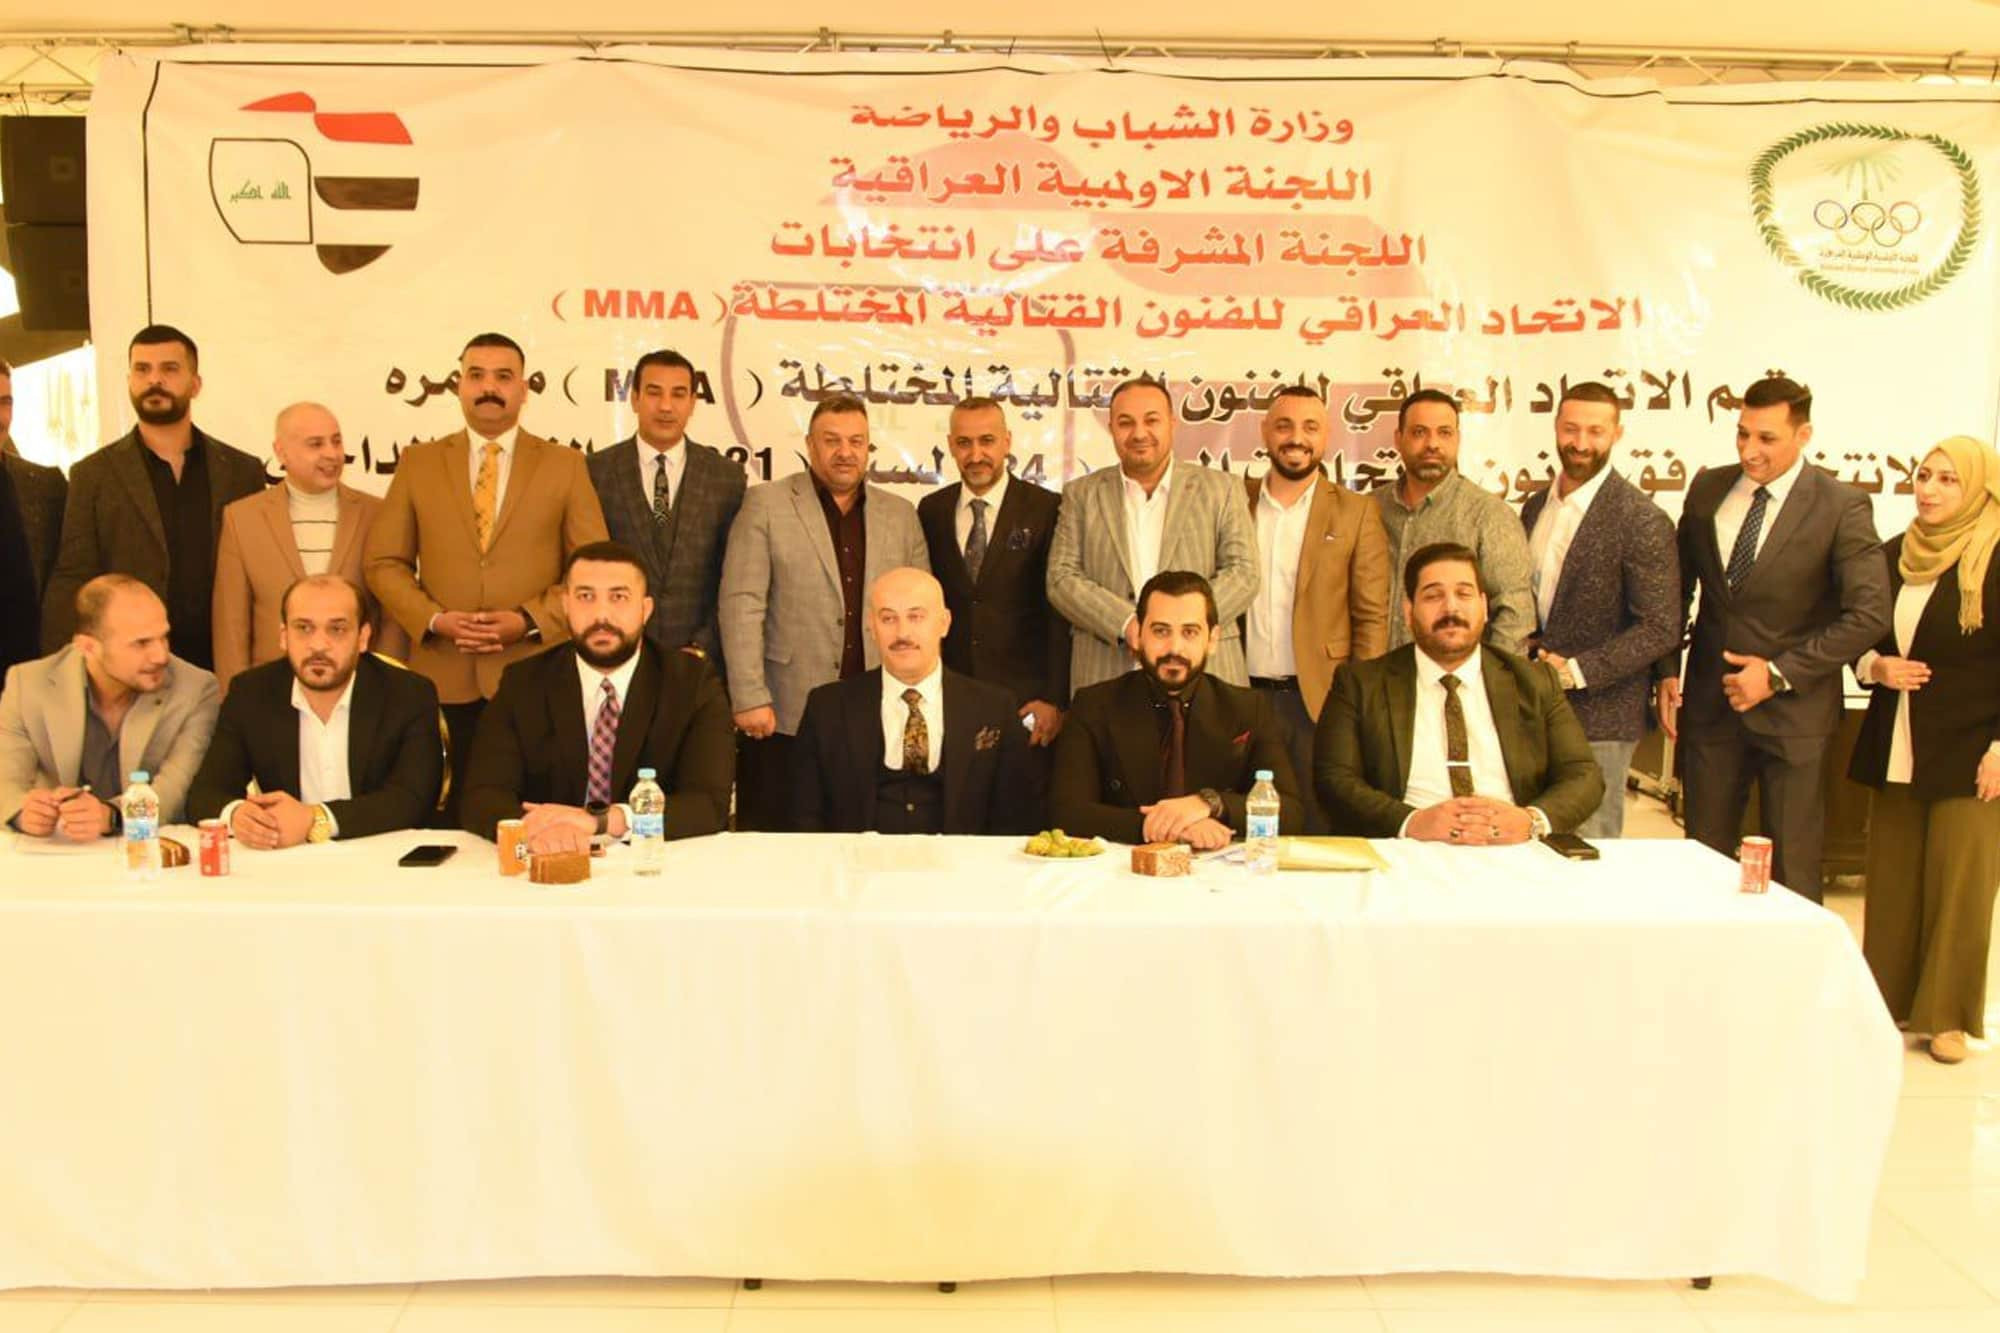 The IRAQMMF elected a new Board as they look forward to the future ©IMMAF